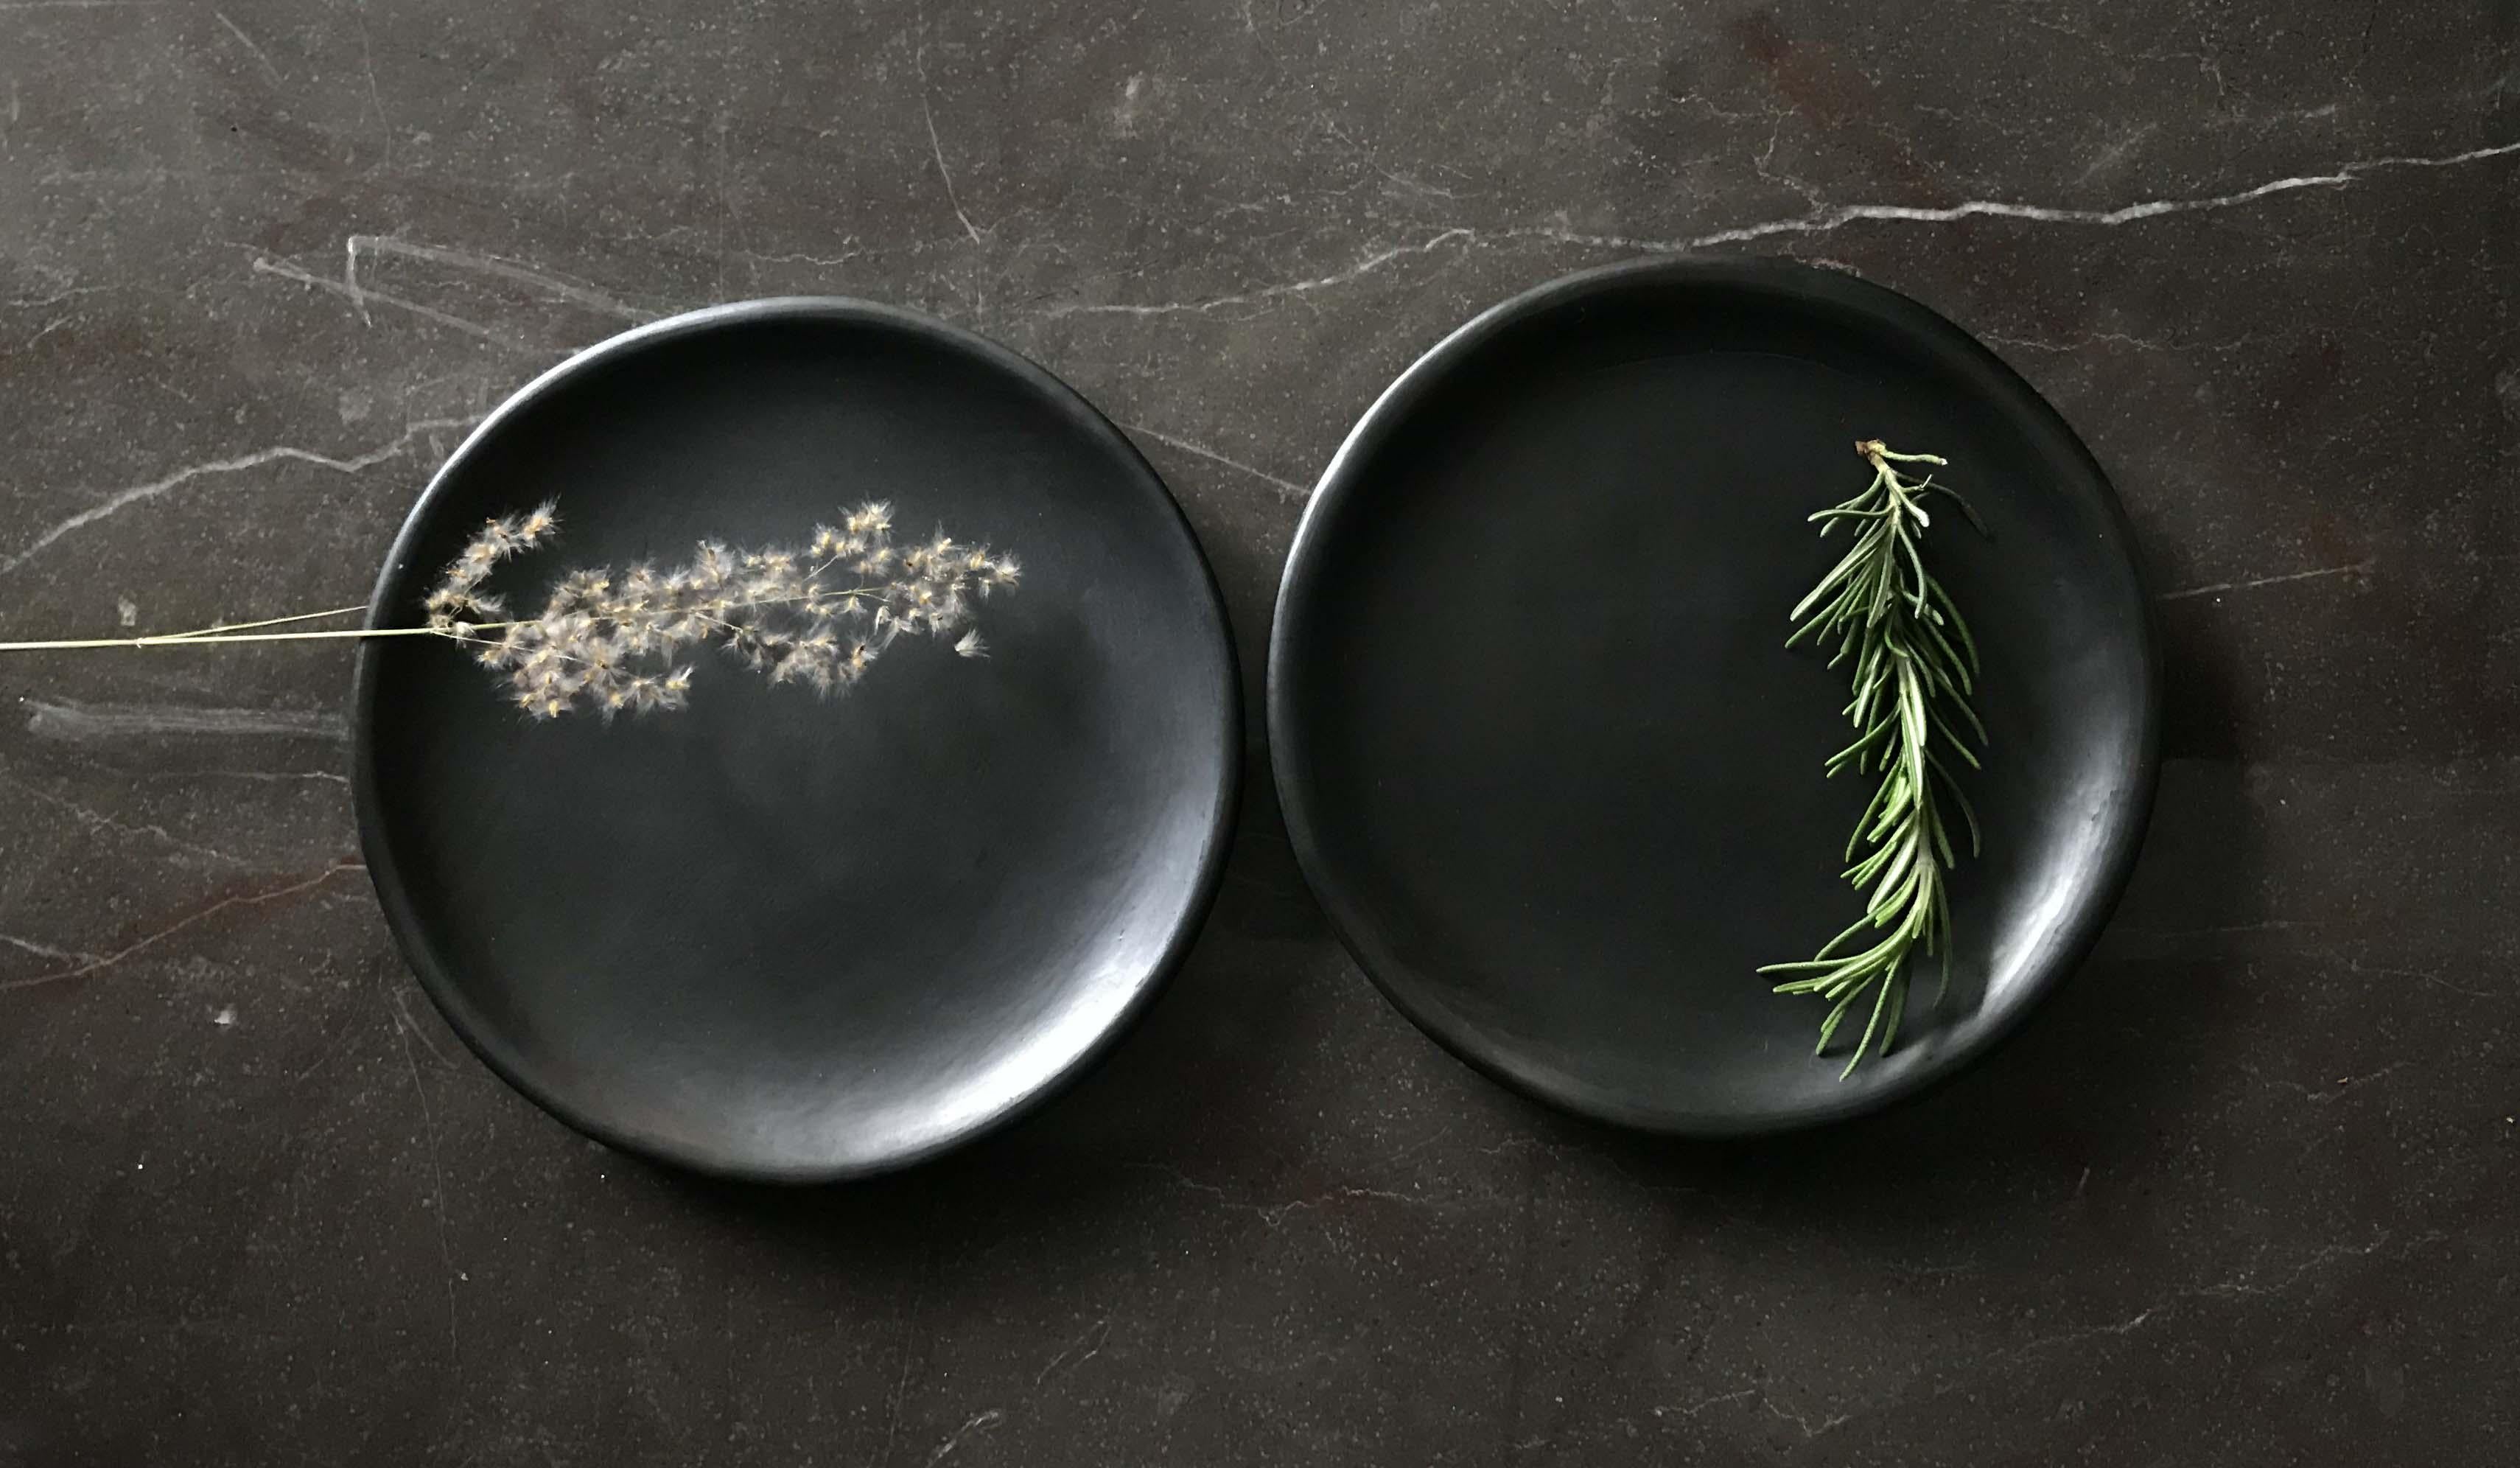 Oaxacan black clay 15cm plates handmade tableware burnished barro negro Oaxaca. Set of 6 pieces.

The soft and rich colour makes this side plate a stylish partner to bread, butter or more spectacular starters.

Handmade in Oaxaca, a state rich in